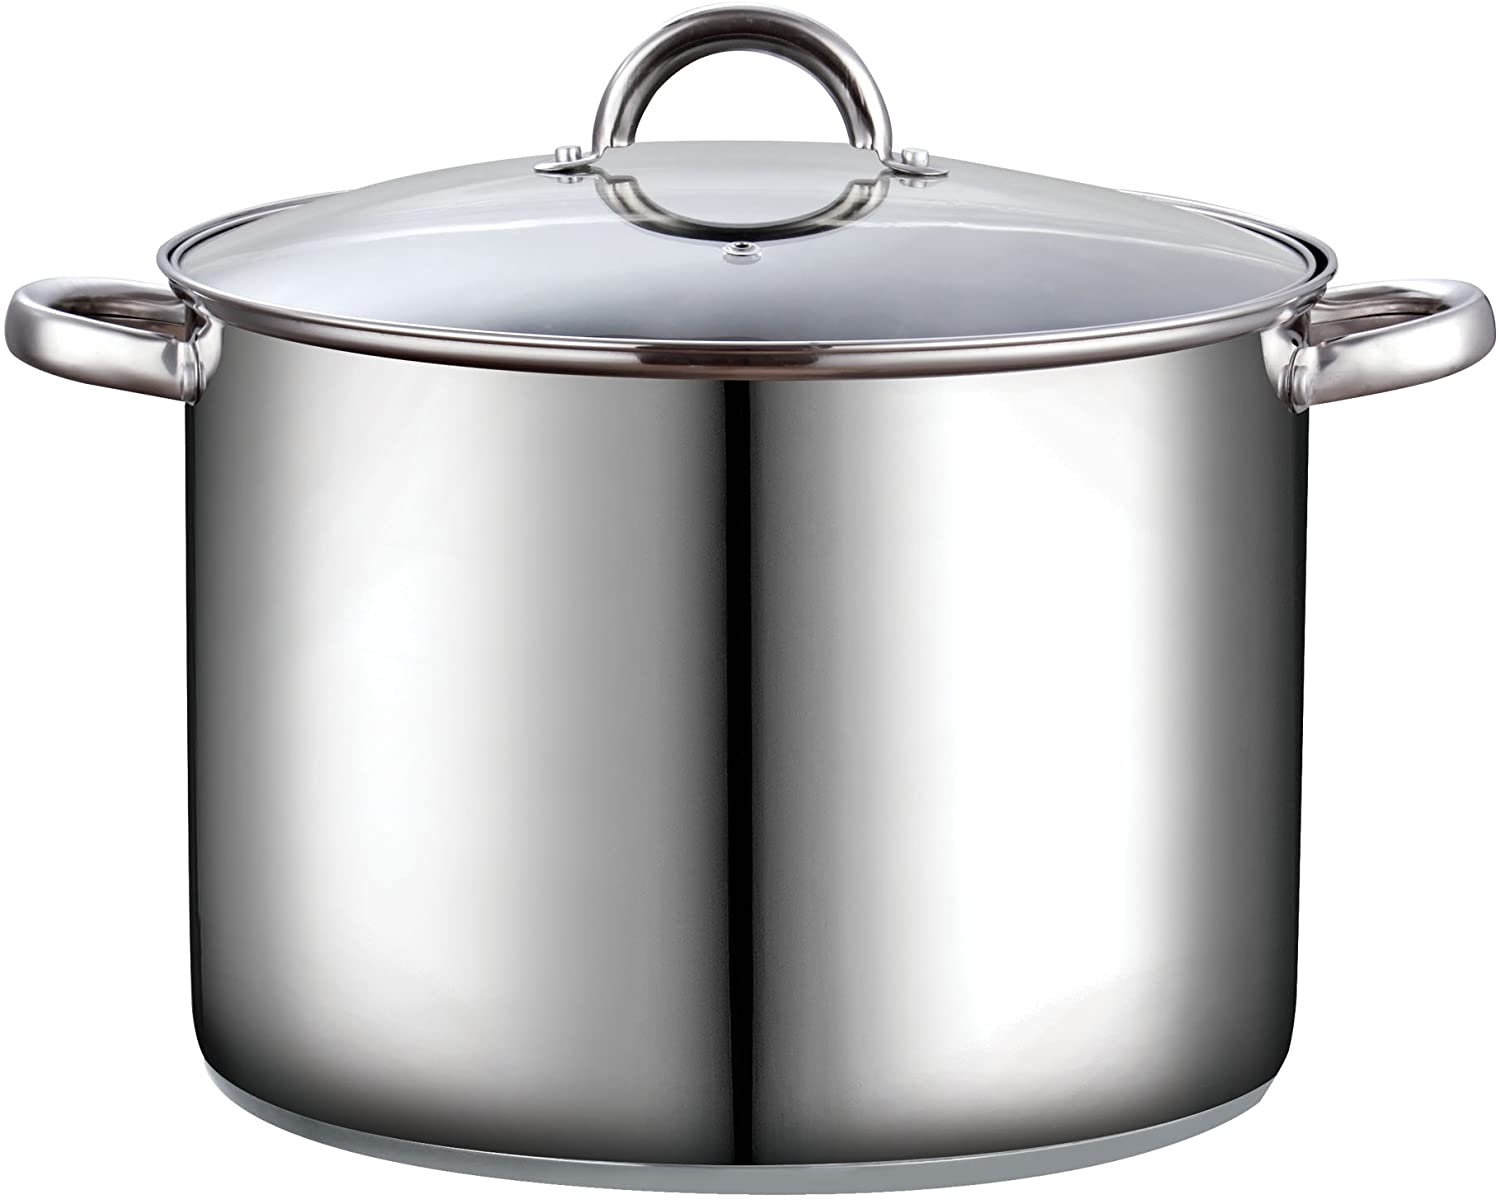 Cook N Home Professional Stainless Steel 8 Quart Stockpot Sauce